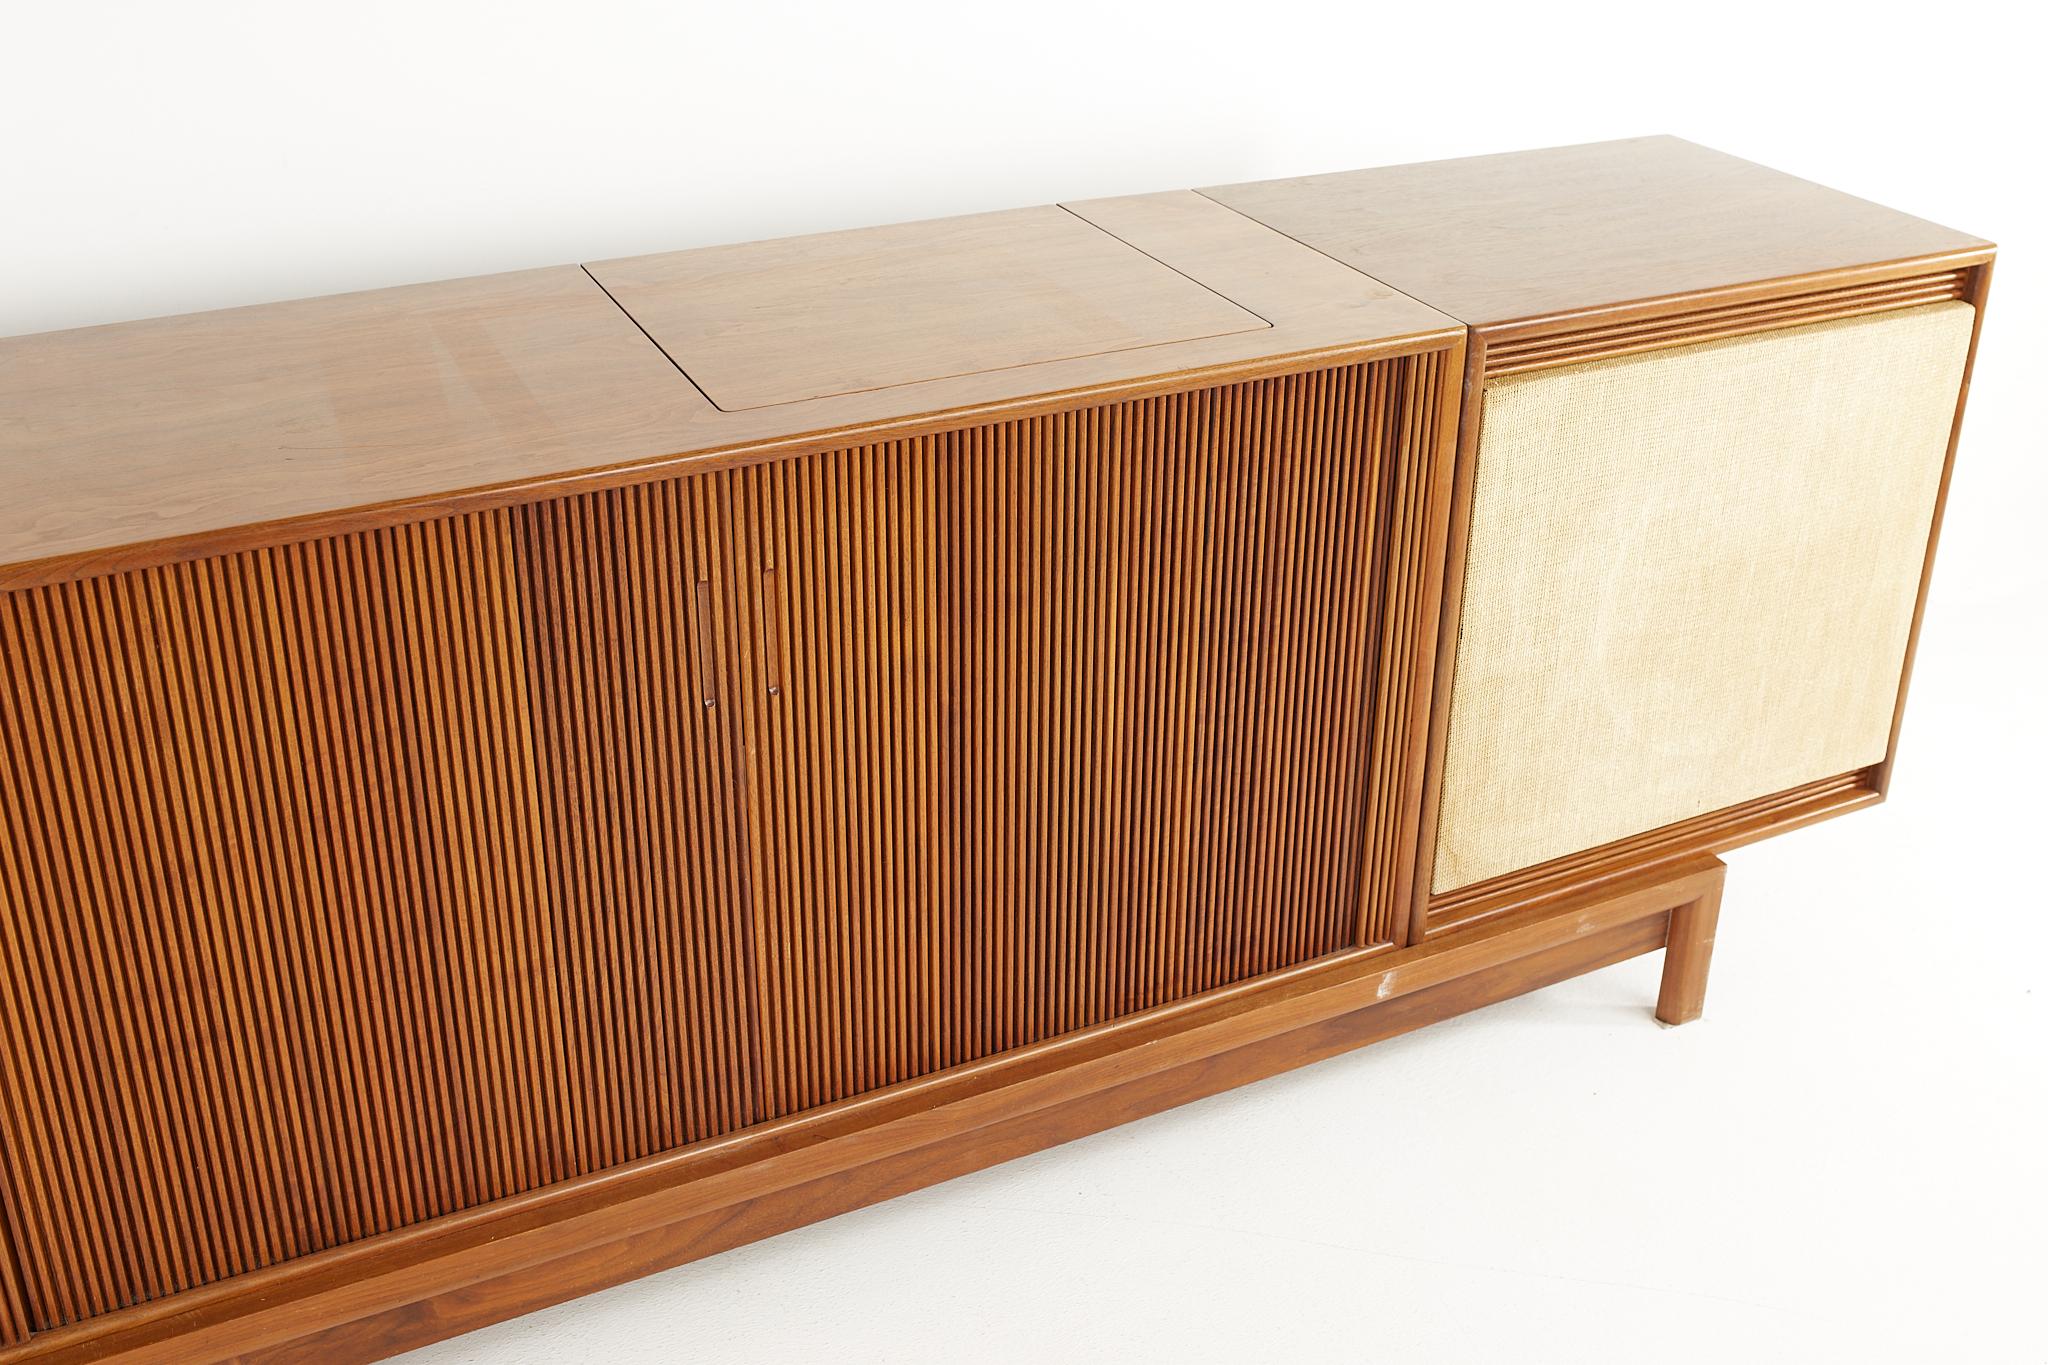 Wood Barzilay Mid Century Modular Tambour Door Stereo Console and Bar